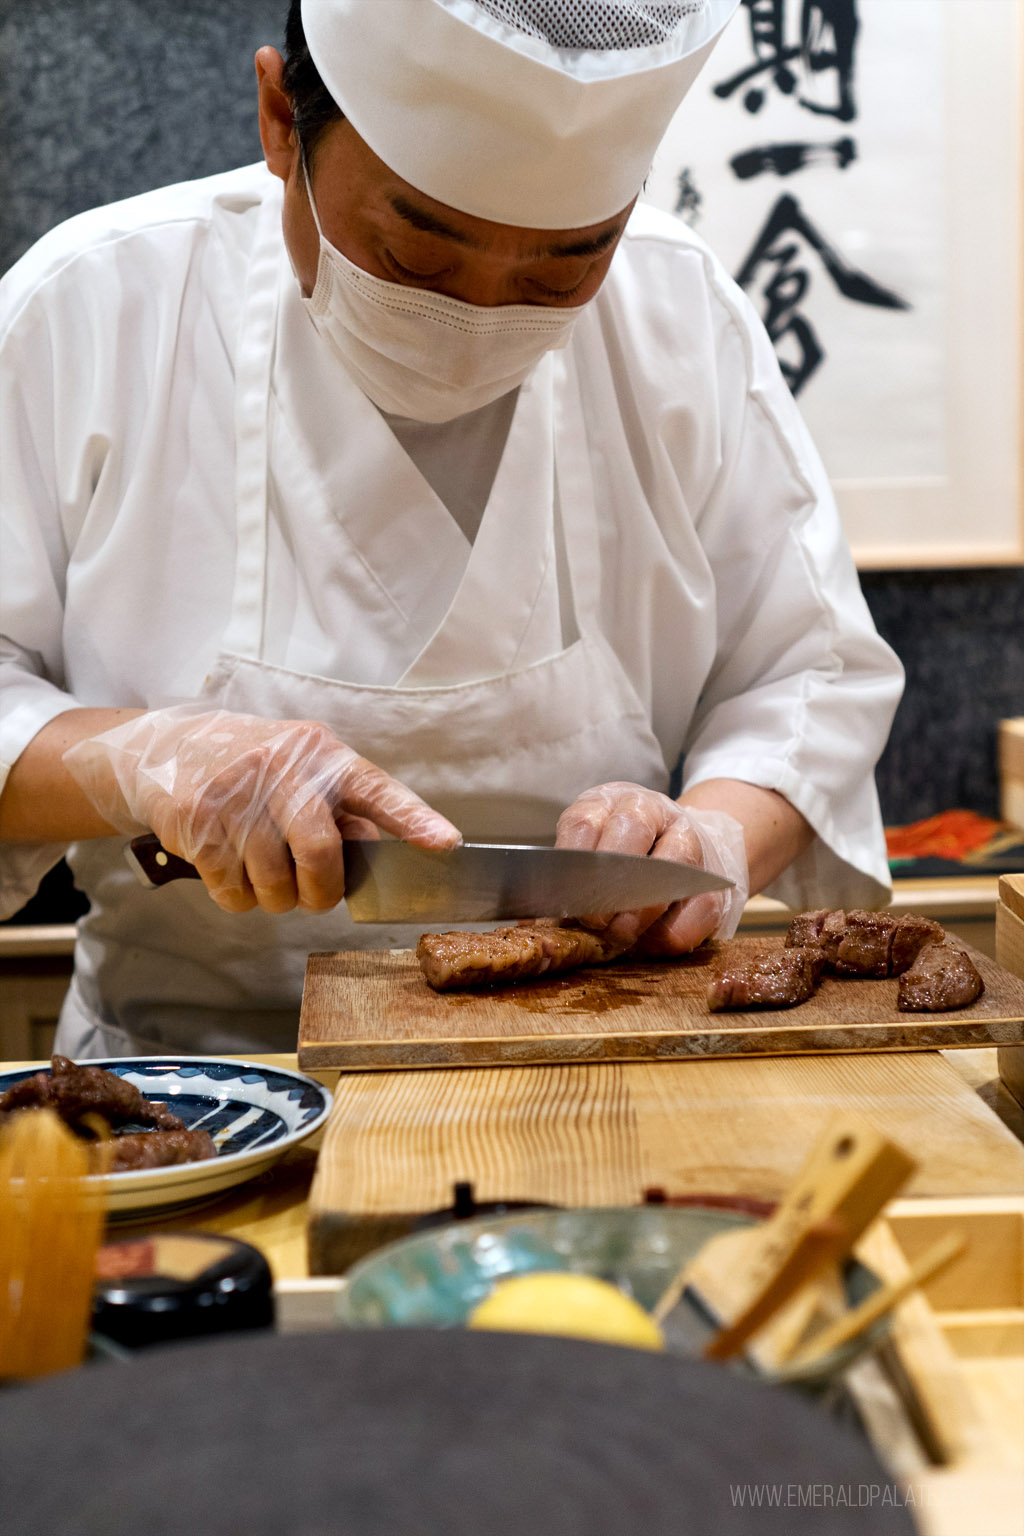 Chef Taneda chopping wagyu beef at an omakase chefs counter, one of the five-star restaurants in Seattle